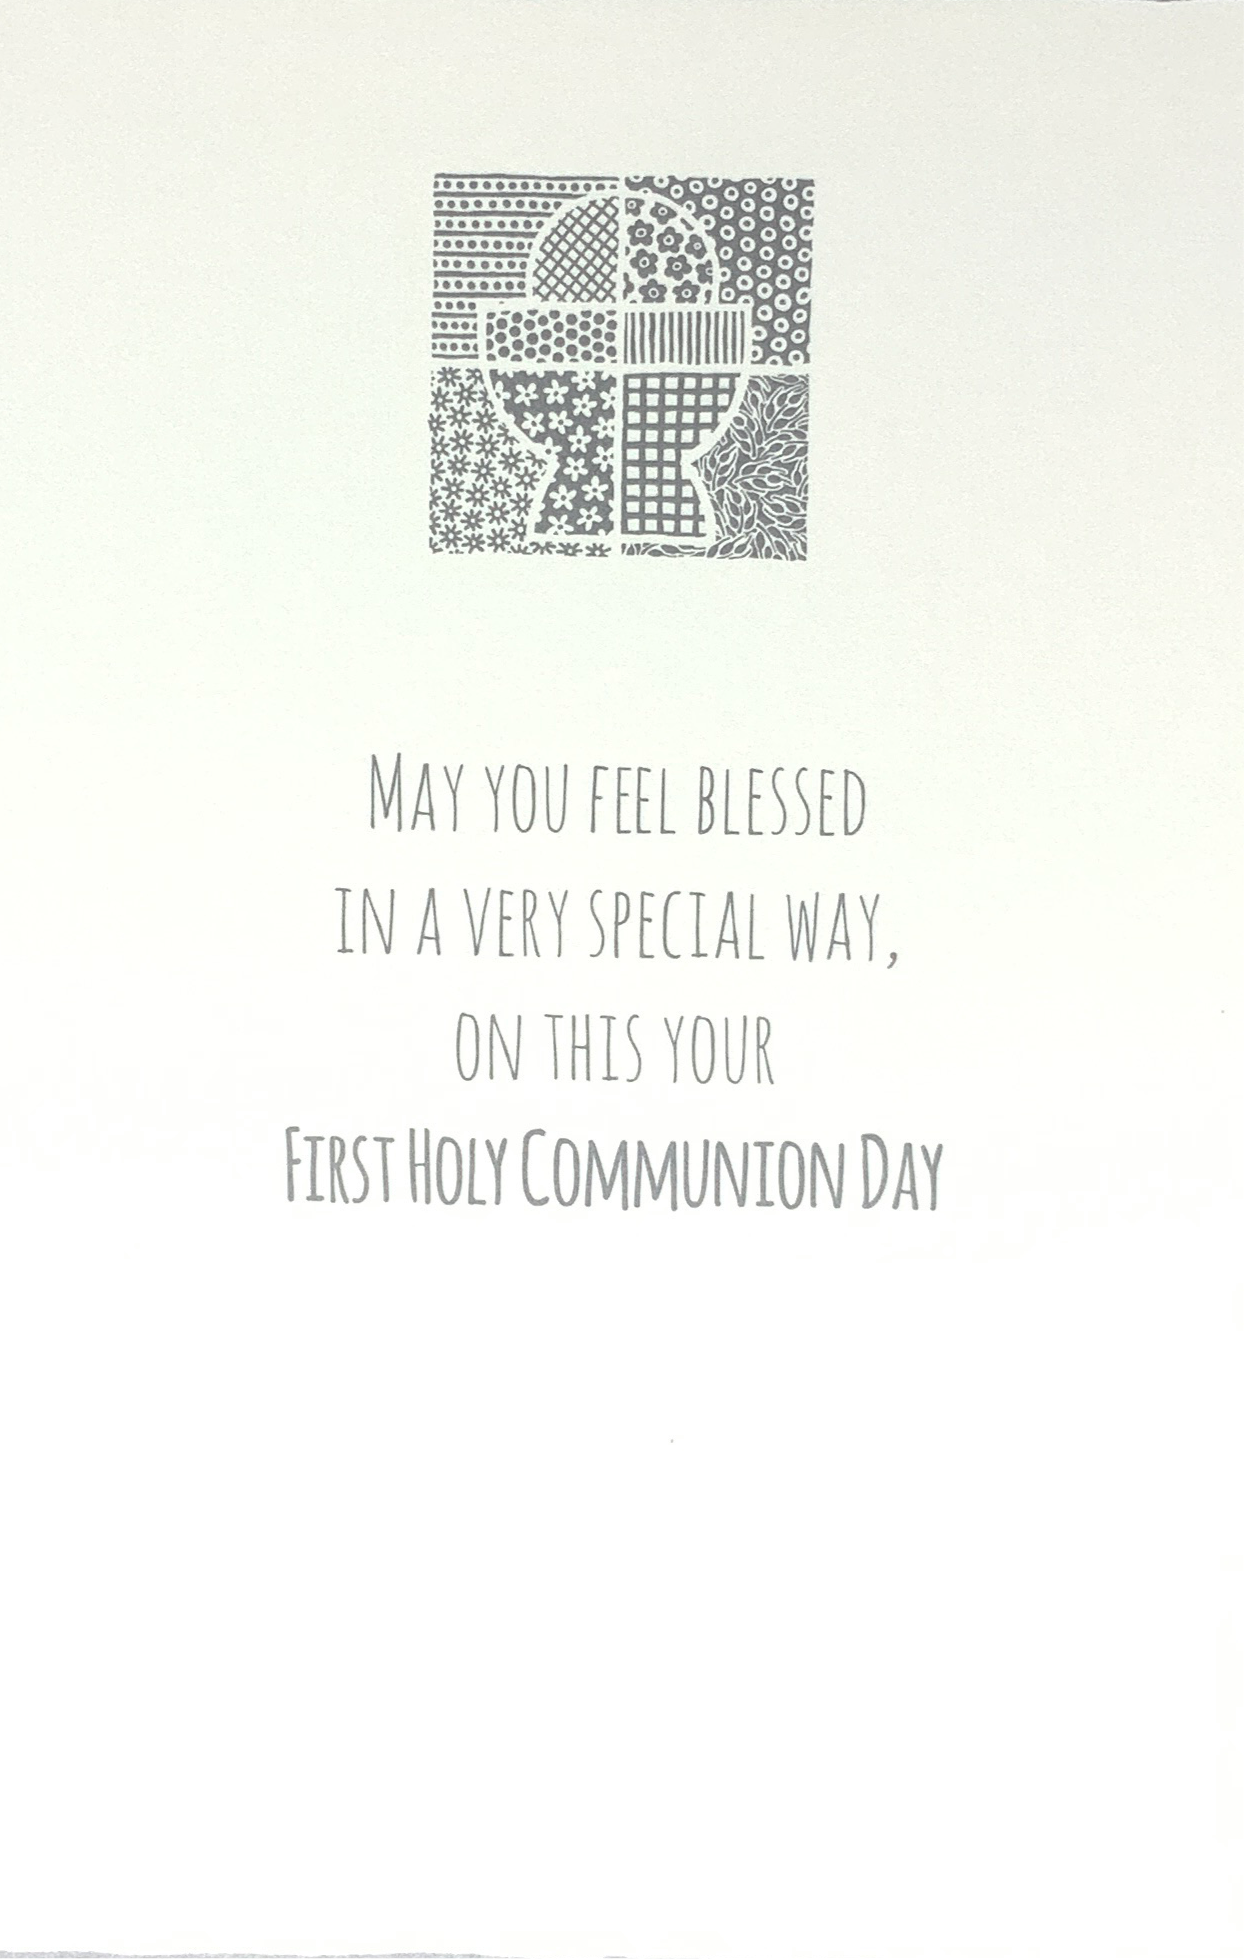 Communion Card - May You Feel Blessed In A very Special Way